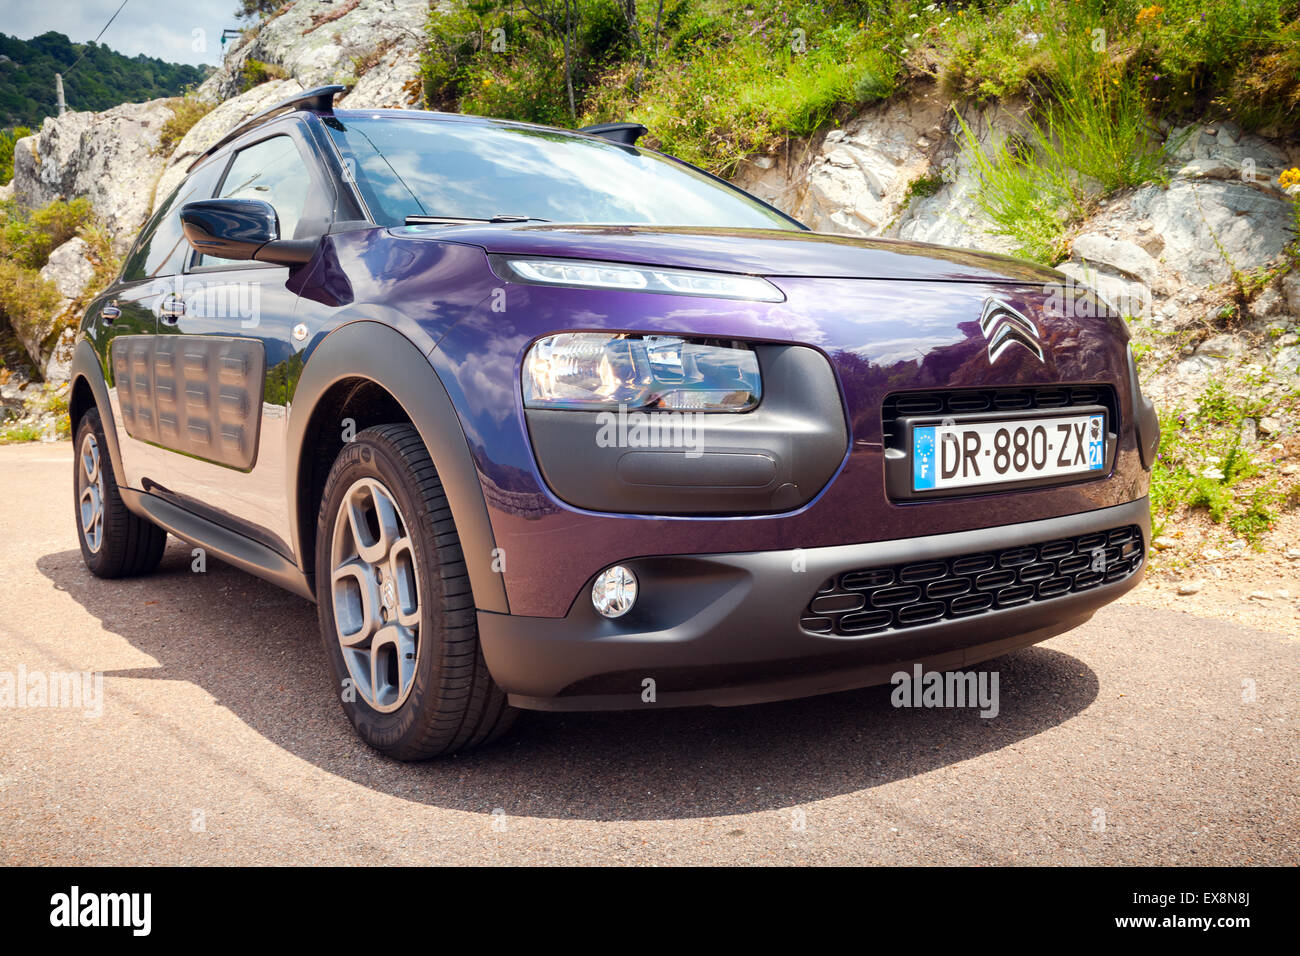 Propriano, France - July 1, 2015: Dark purple Citroen C4 Cactus on the mountain road of Corsica, France Stock Photo